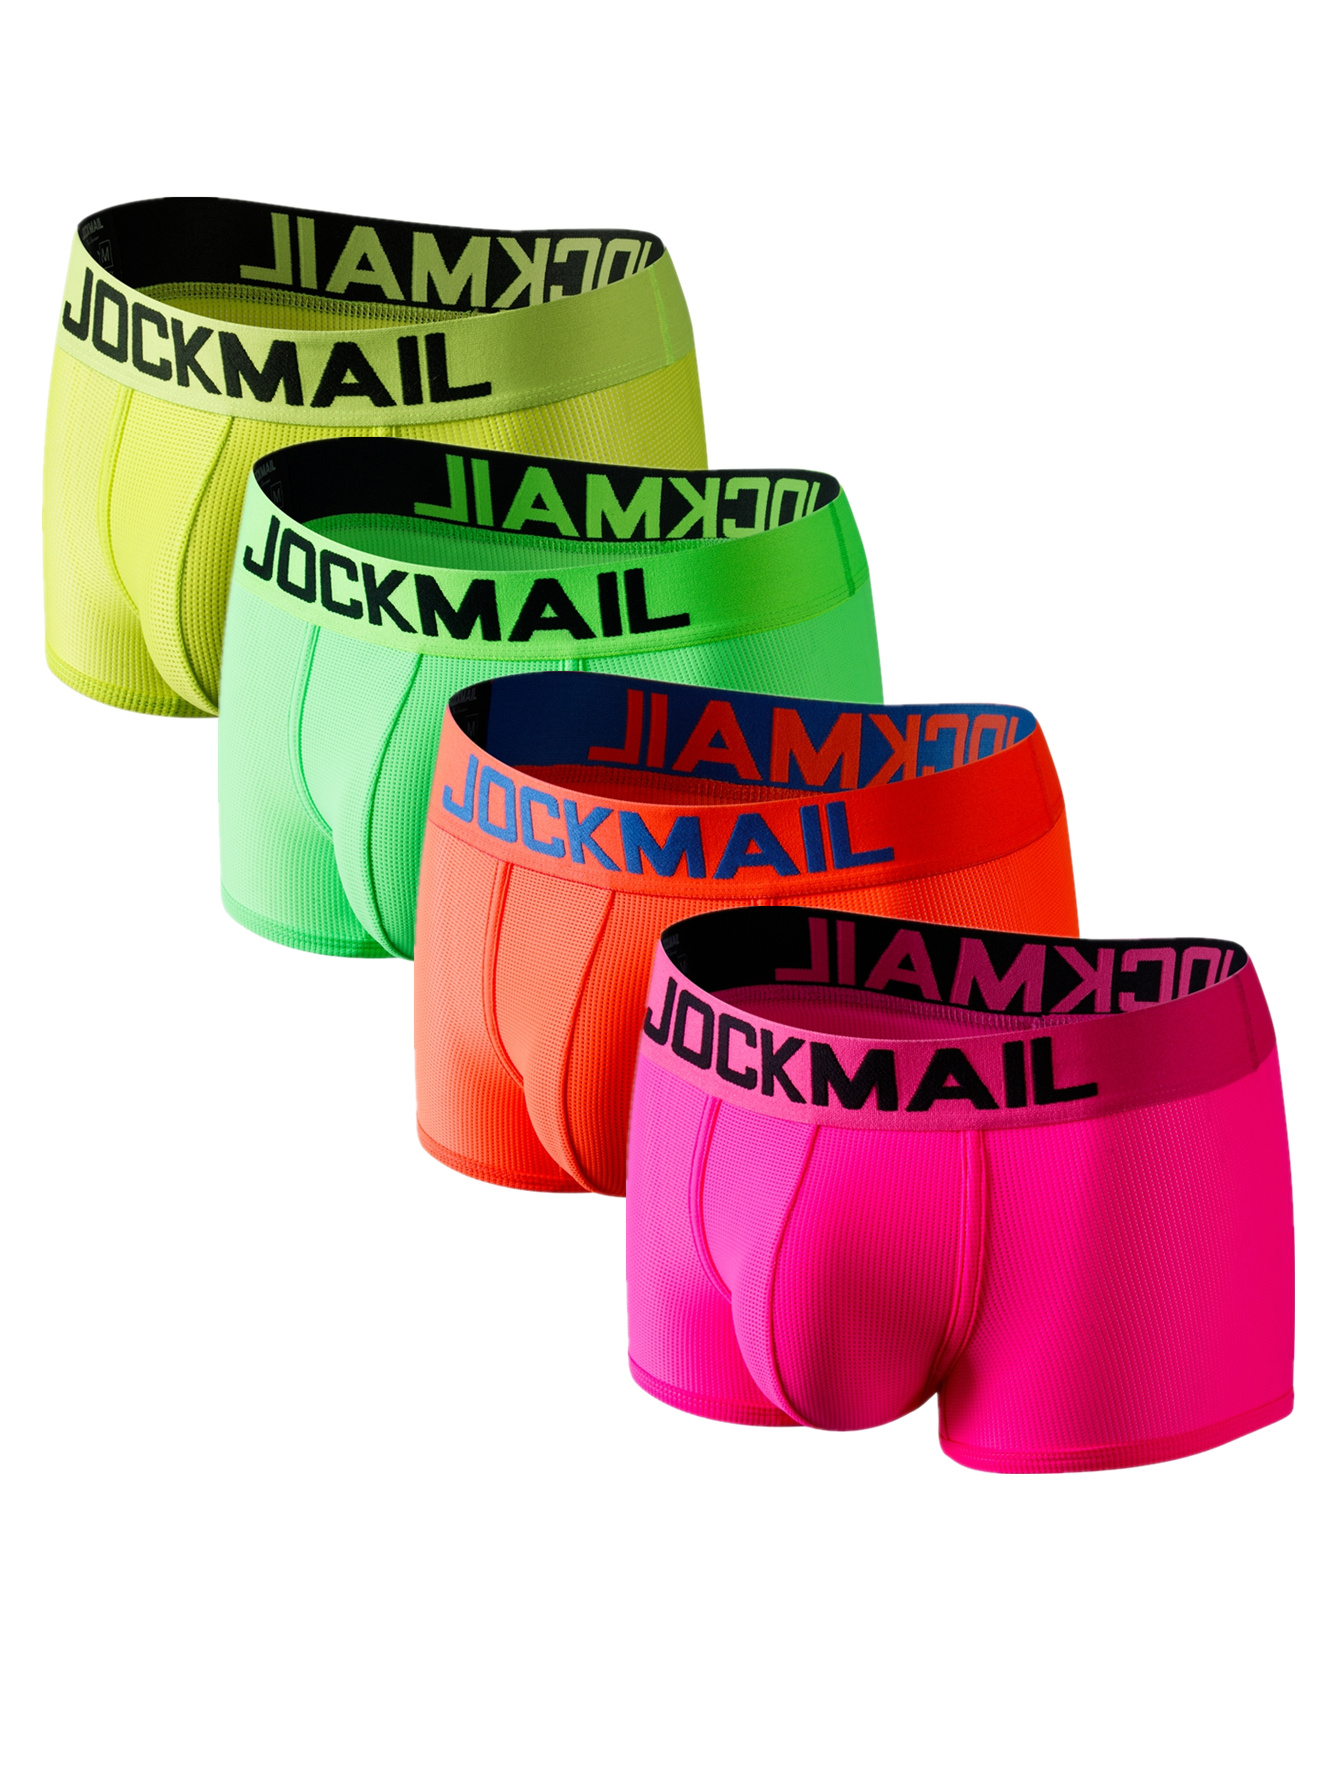 Jockmail Mens Mesh Breathable Underwear Back Padded Boxer Briefs